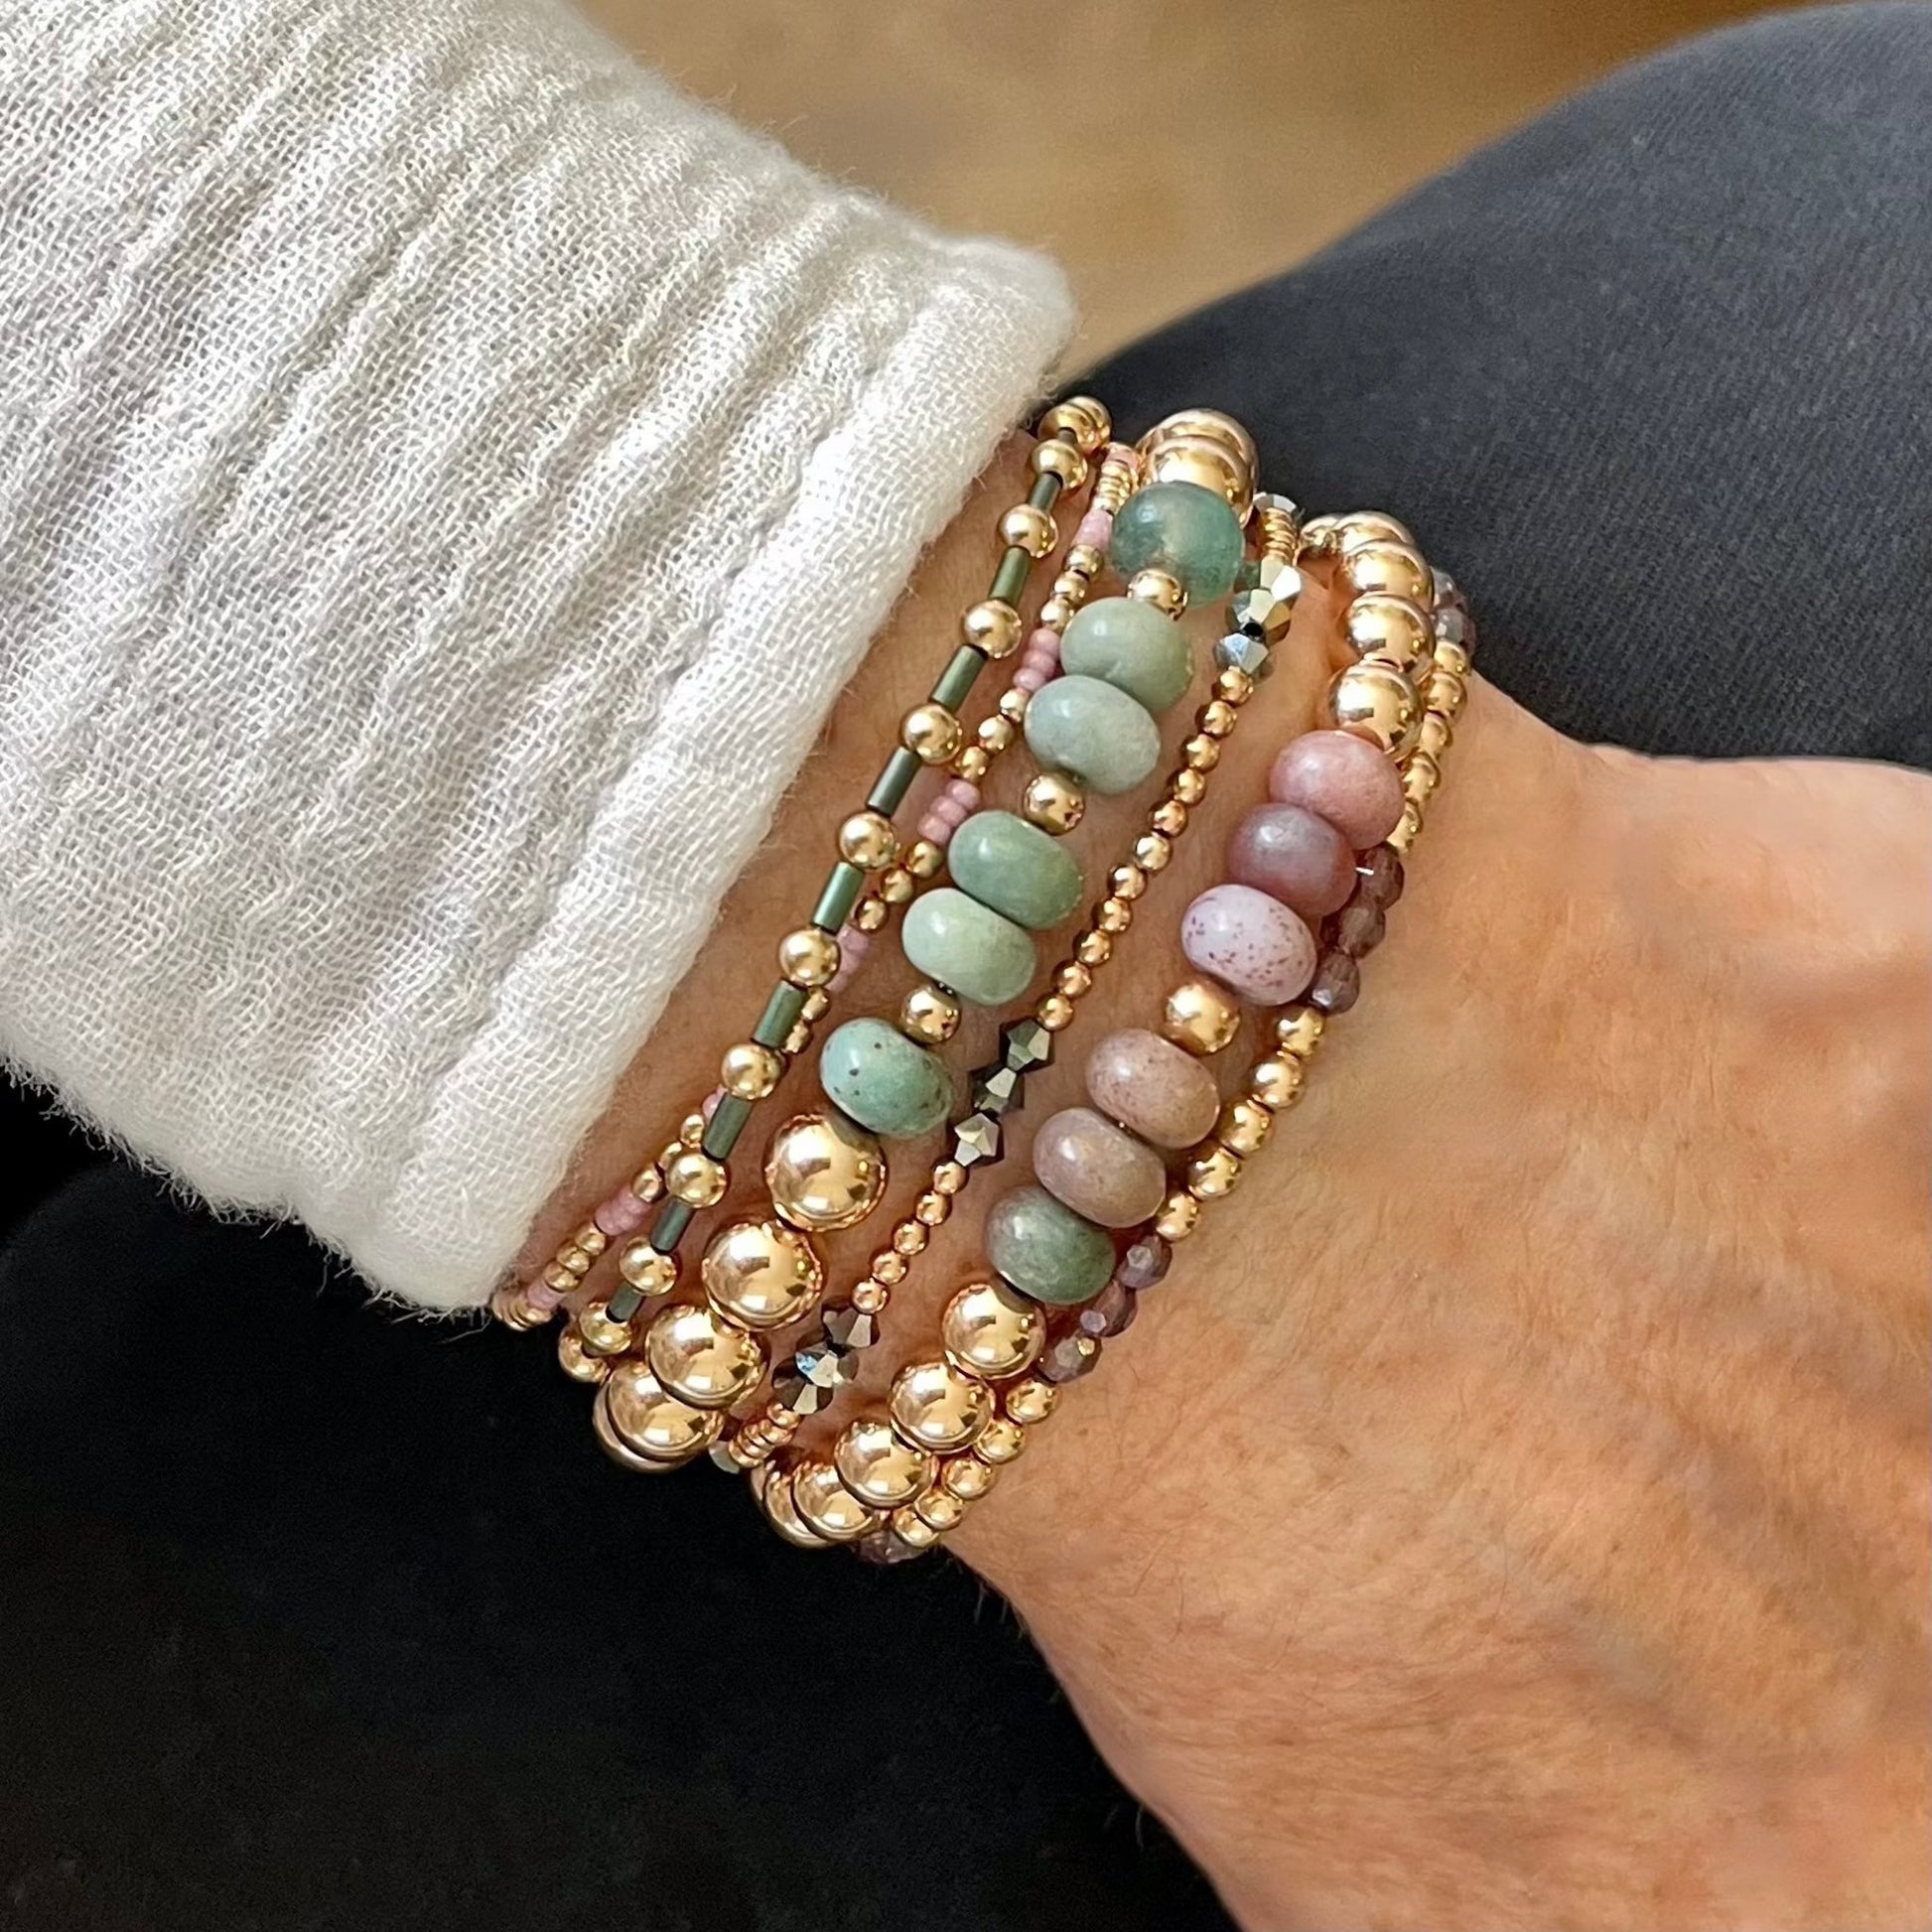 Rose gold bracelet stack with 6 sage and lilac gemstone and seed bead stretch bracelets